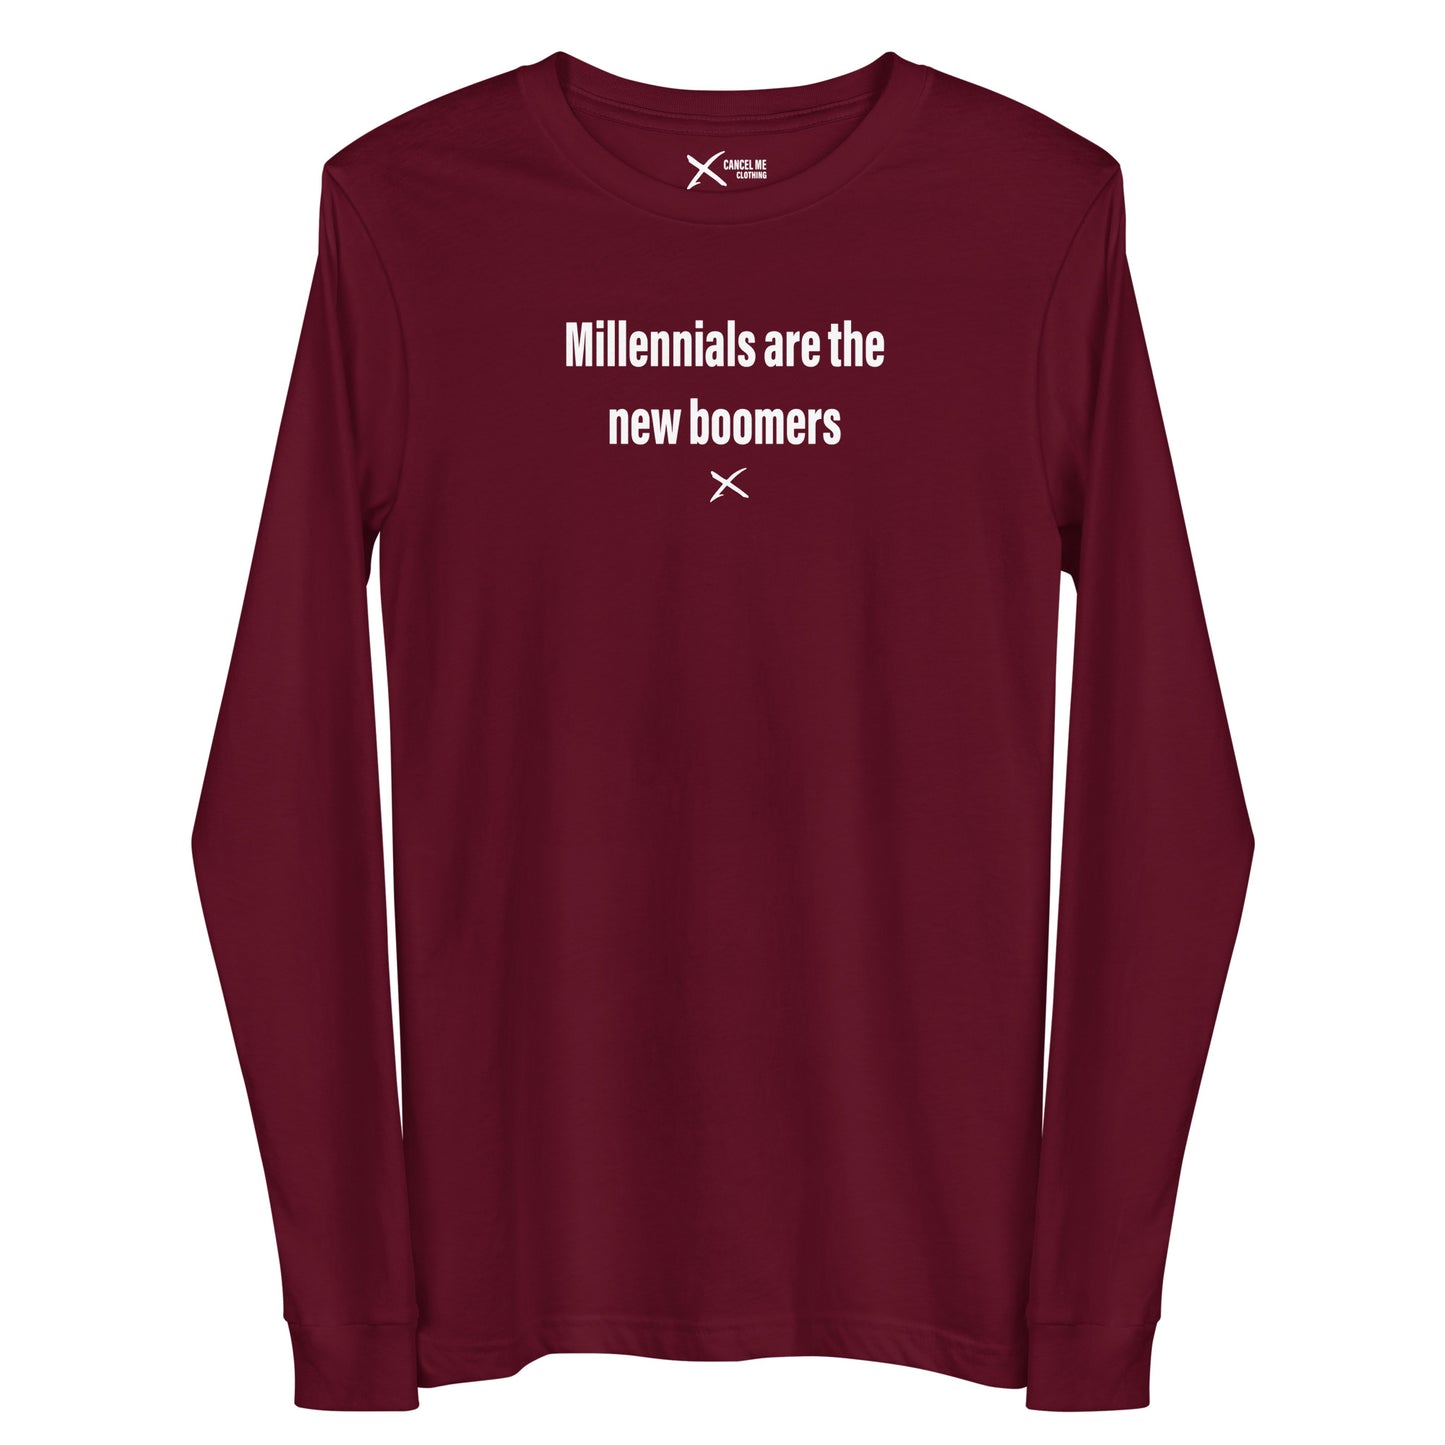 Millennials are the new boomers - Longsleeve